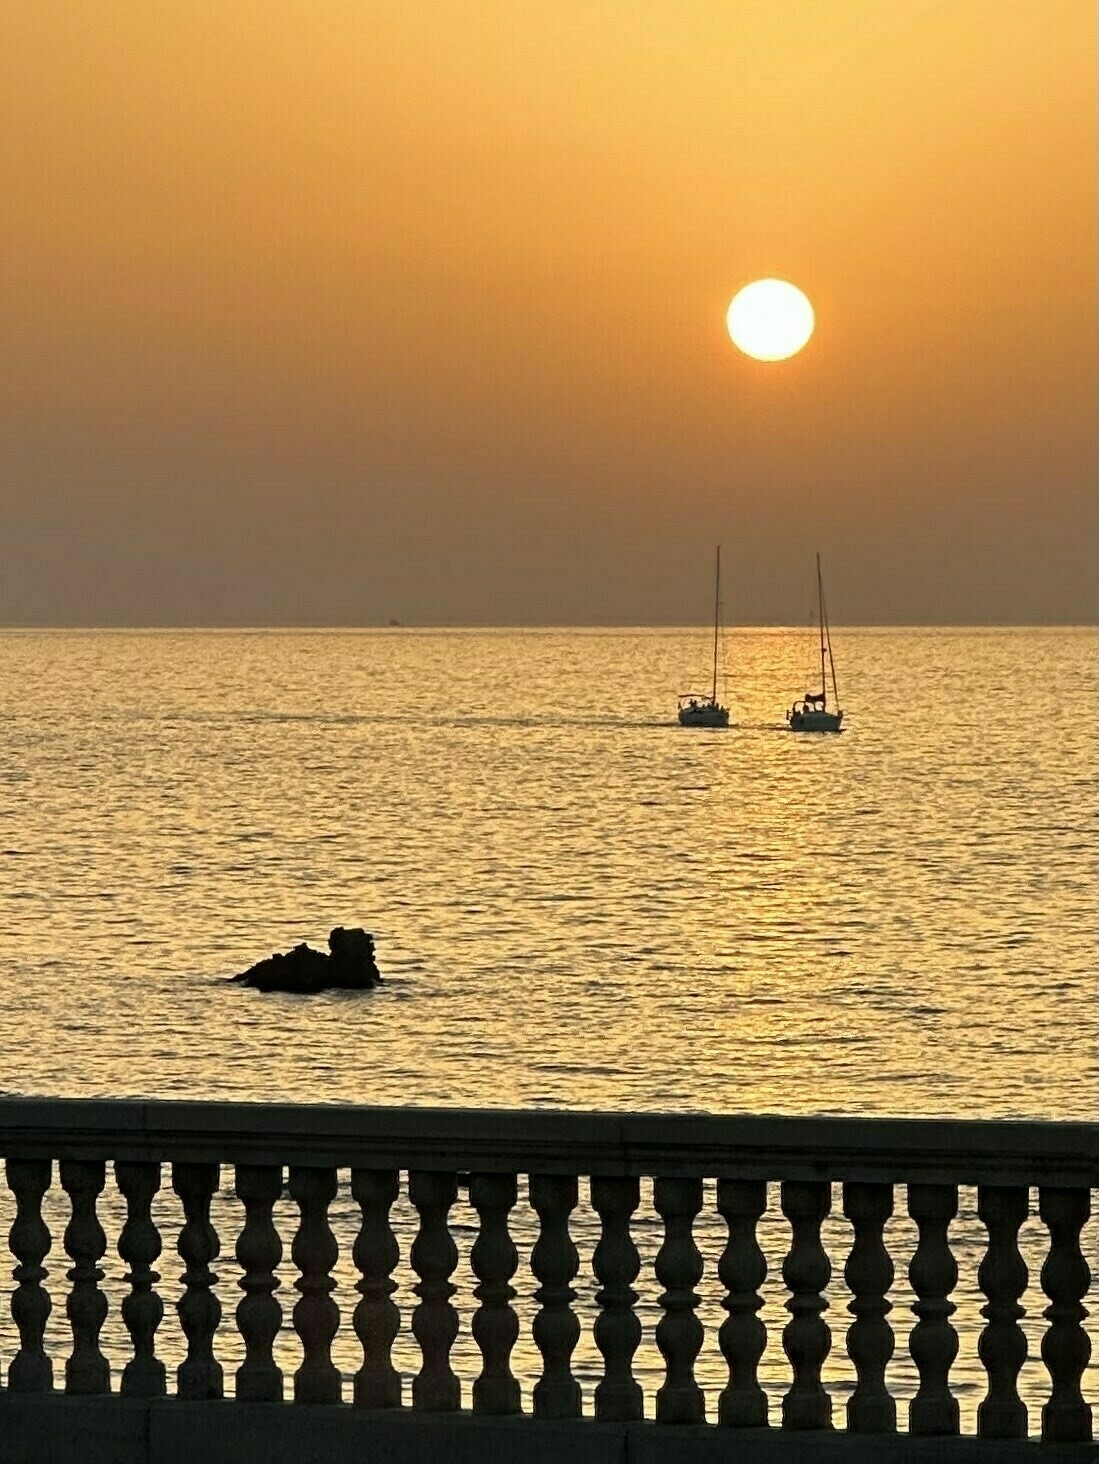 Sunset over the sea, two sailing boats in the distance under the glowing sun, a railing silhouetted in the foregrounds 